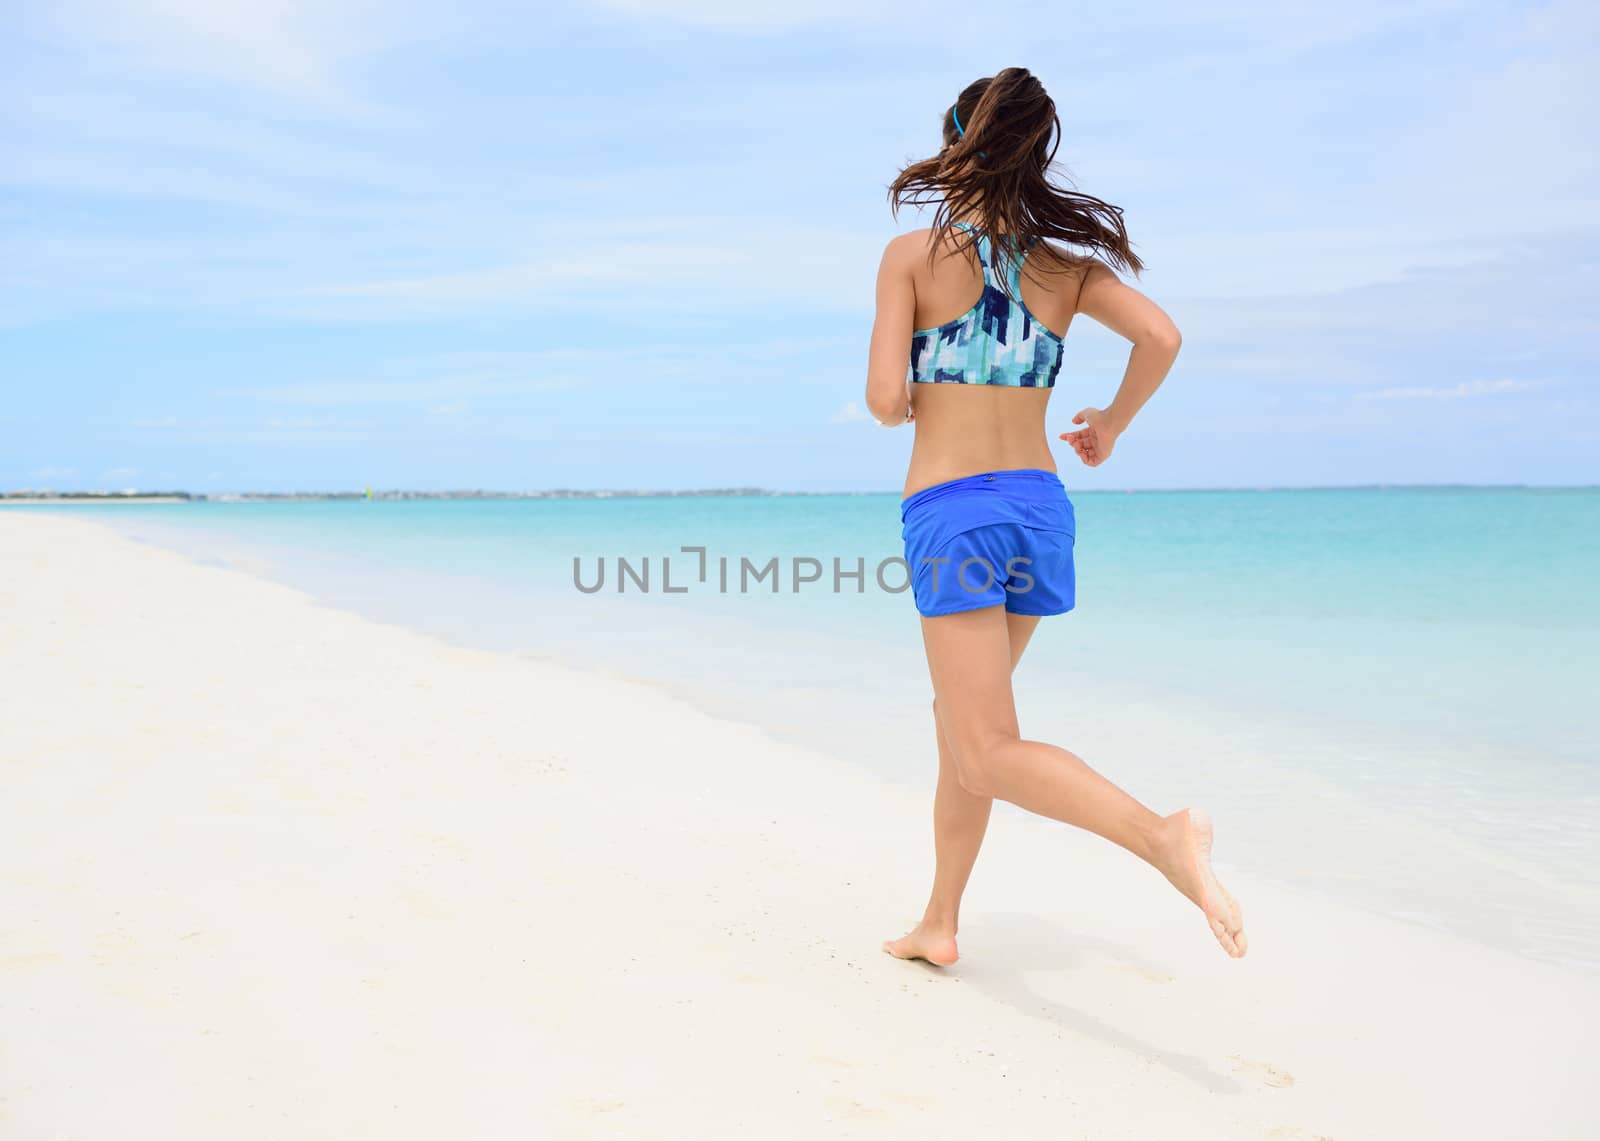 Runner training cardio running on beach. Back view of woman jogging barefoot in tropical destination barefoot in activewear blue sports bra and active shorts living a healthy life.